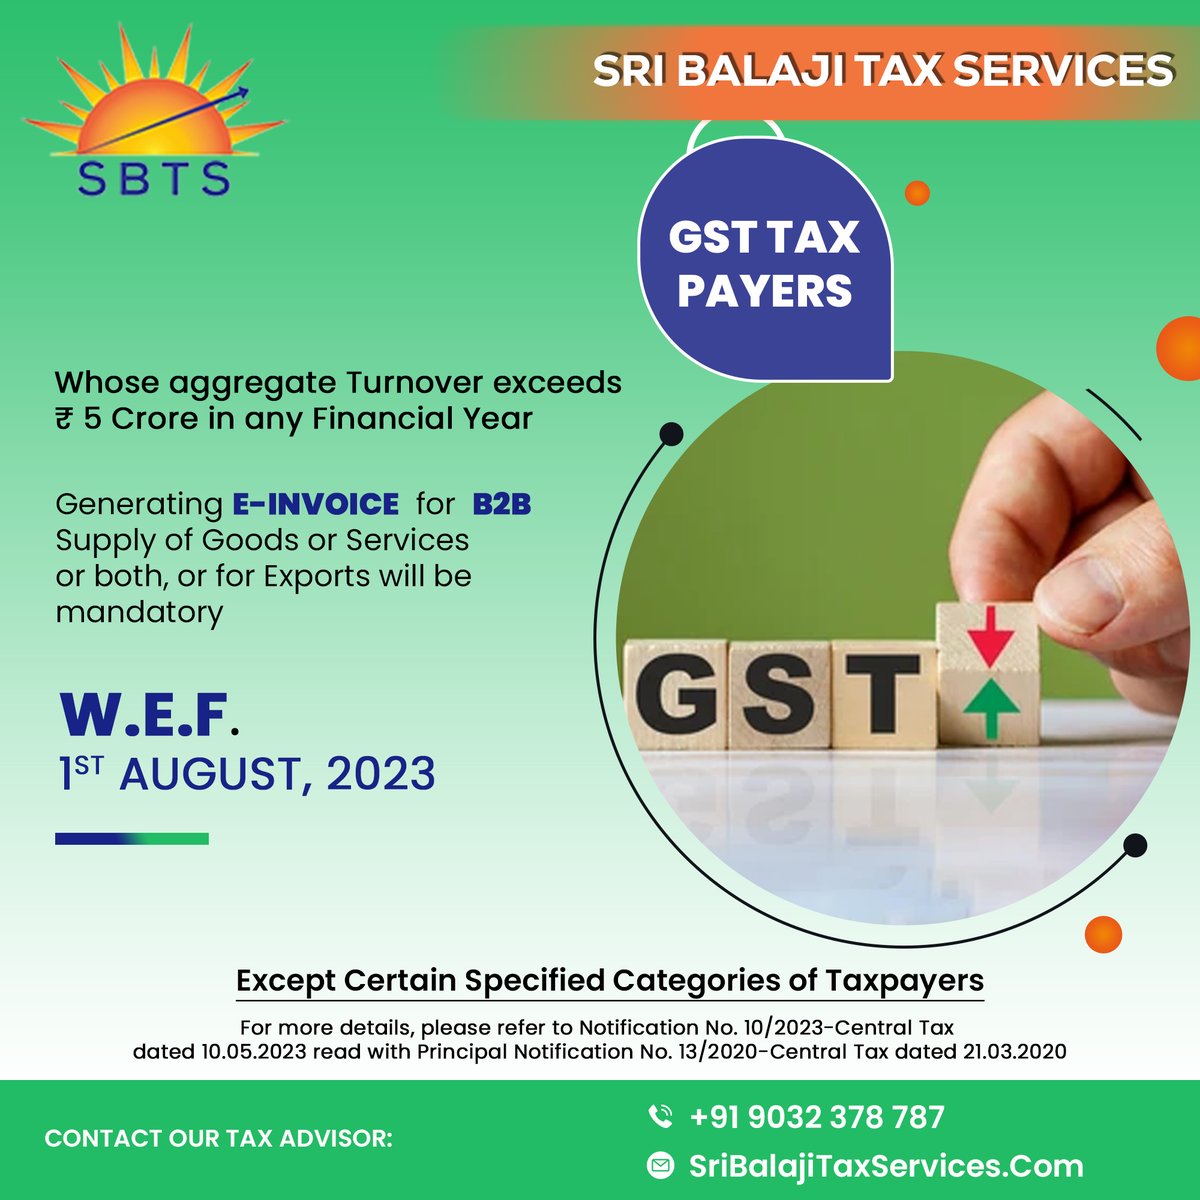 Important Announcement for GST Tax Payers!

#gstfiling #gstreturns #gstregistration #gstin #gstindia #gsttax #gstreturnfiling #gstconsultant #gstexpert #gstservices #gstcompliance #gstrates #gstupdate #gstdue #gstaccounting #gstpayments #gstlaw #gstreturnfile #gstreturnsfiling